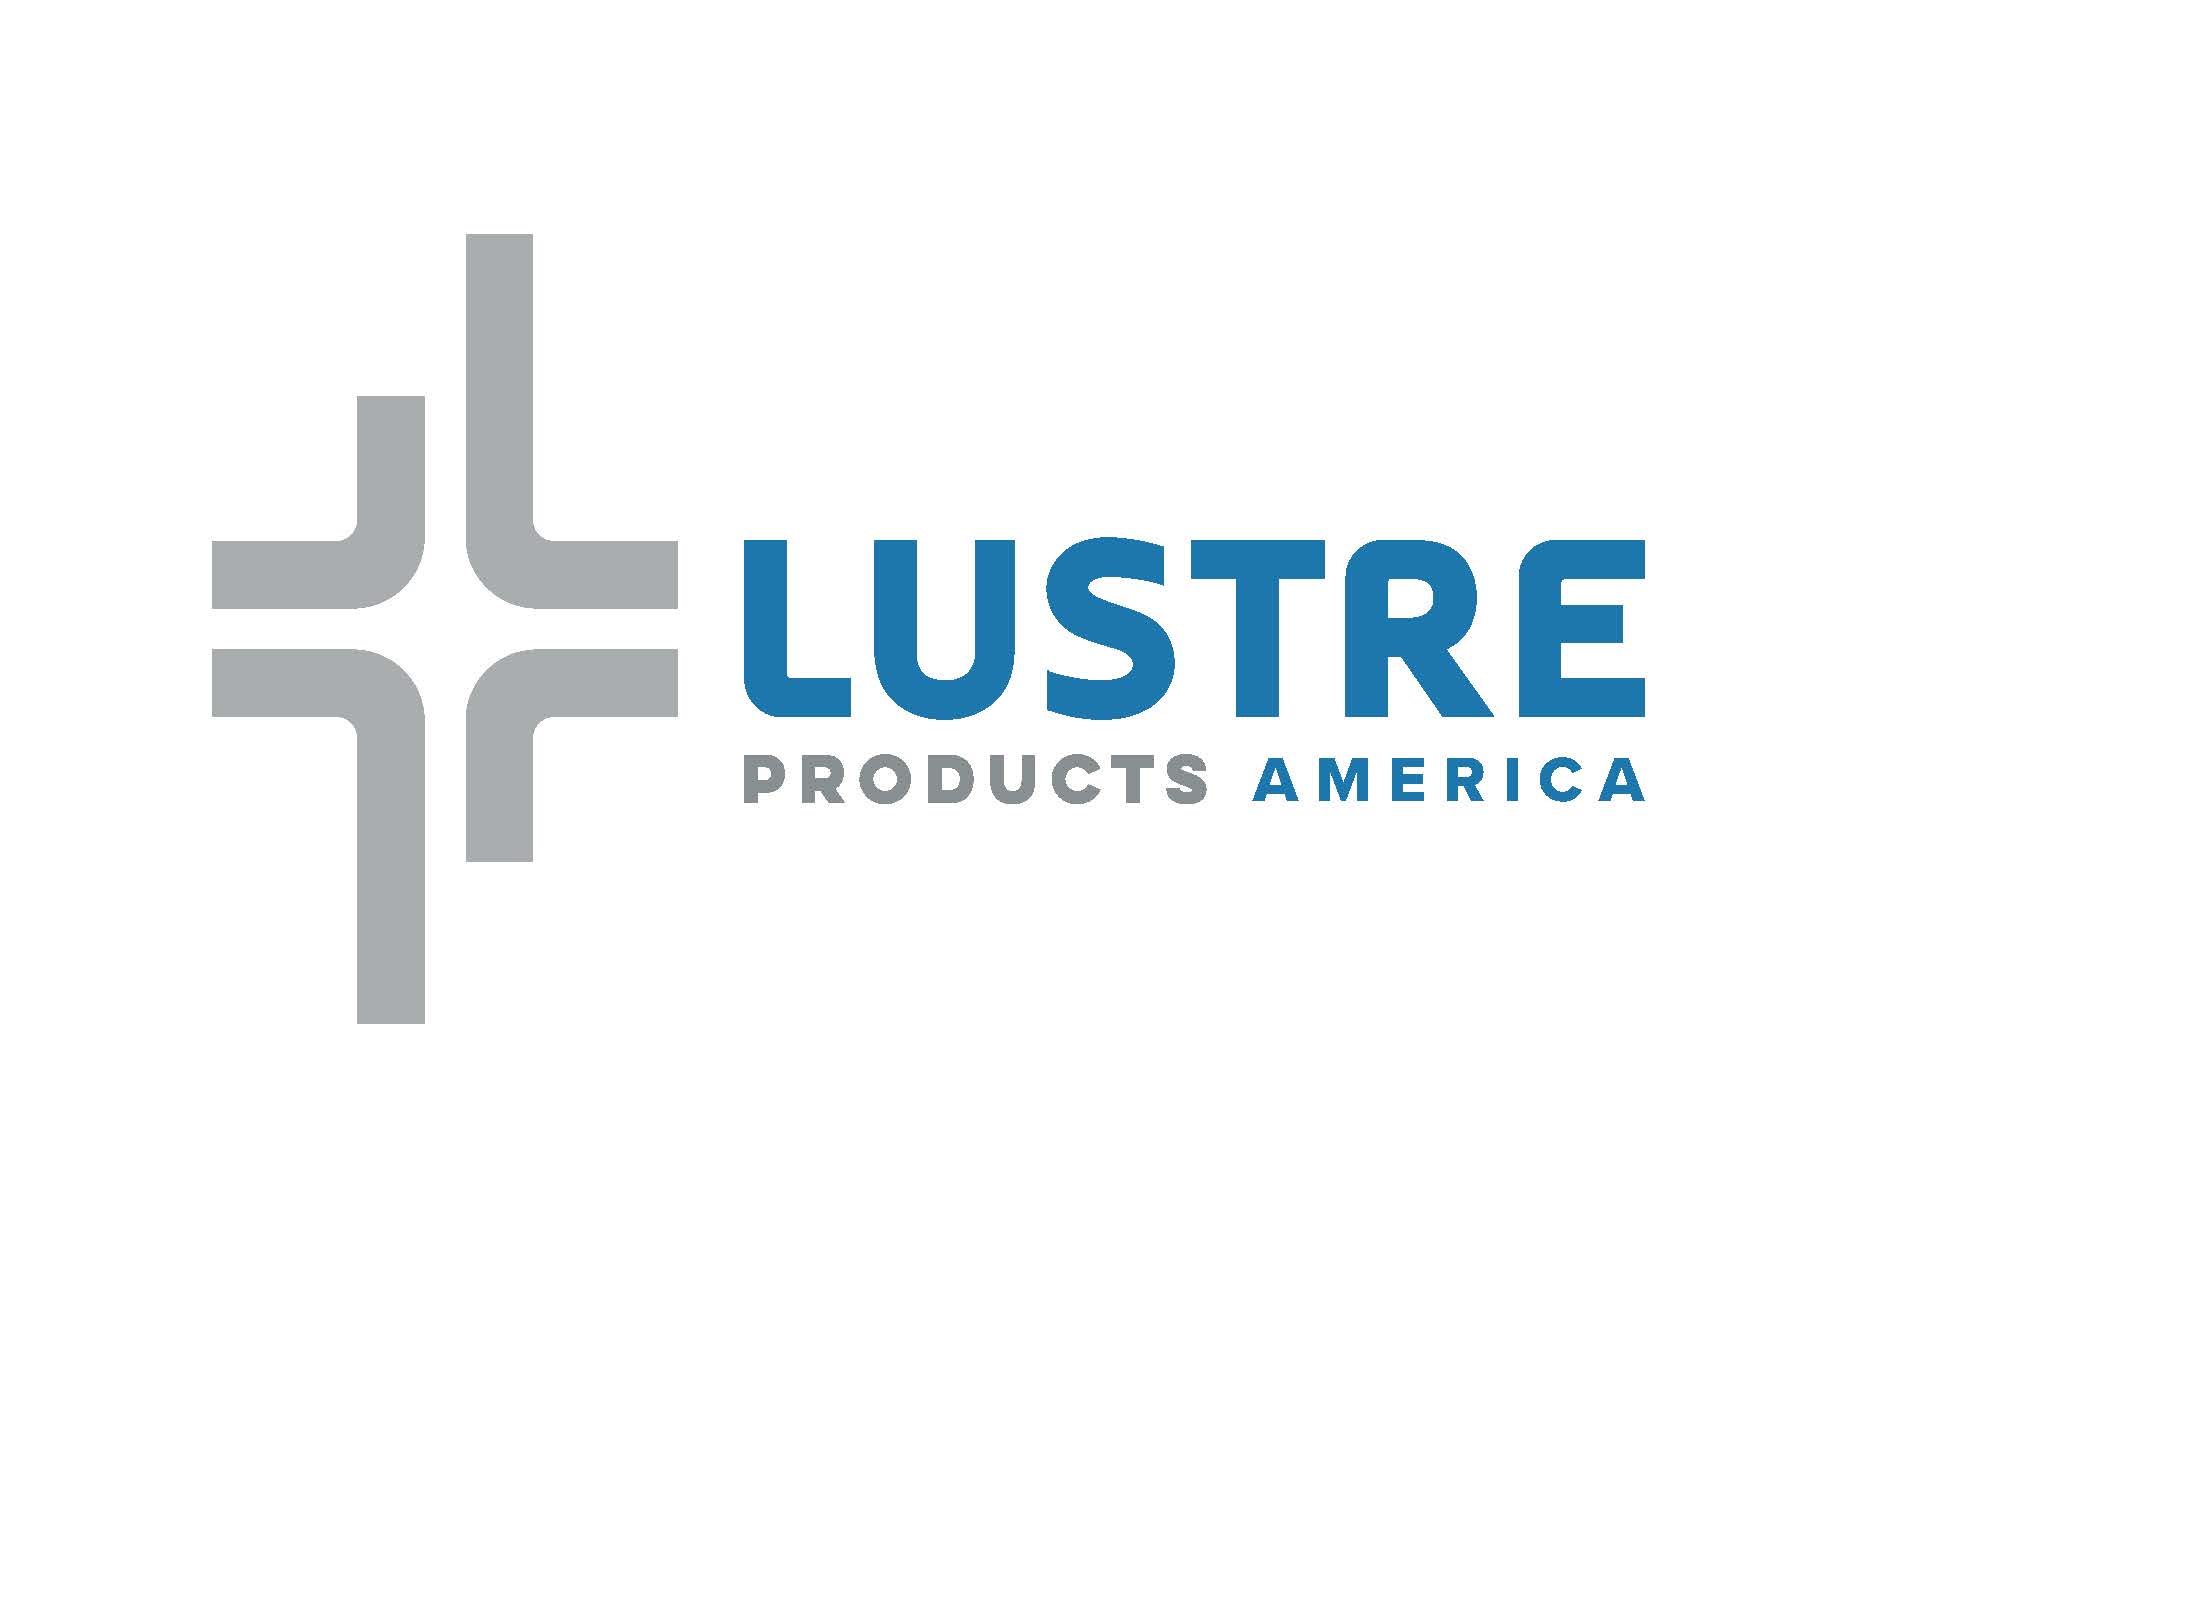 Lustre Products logo